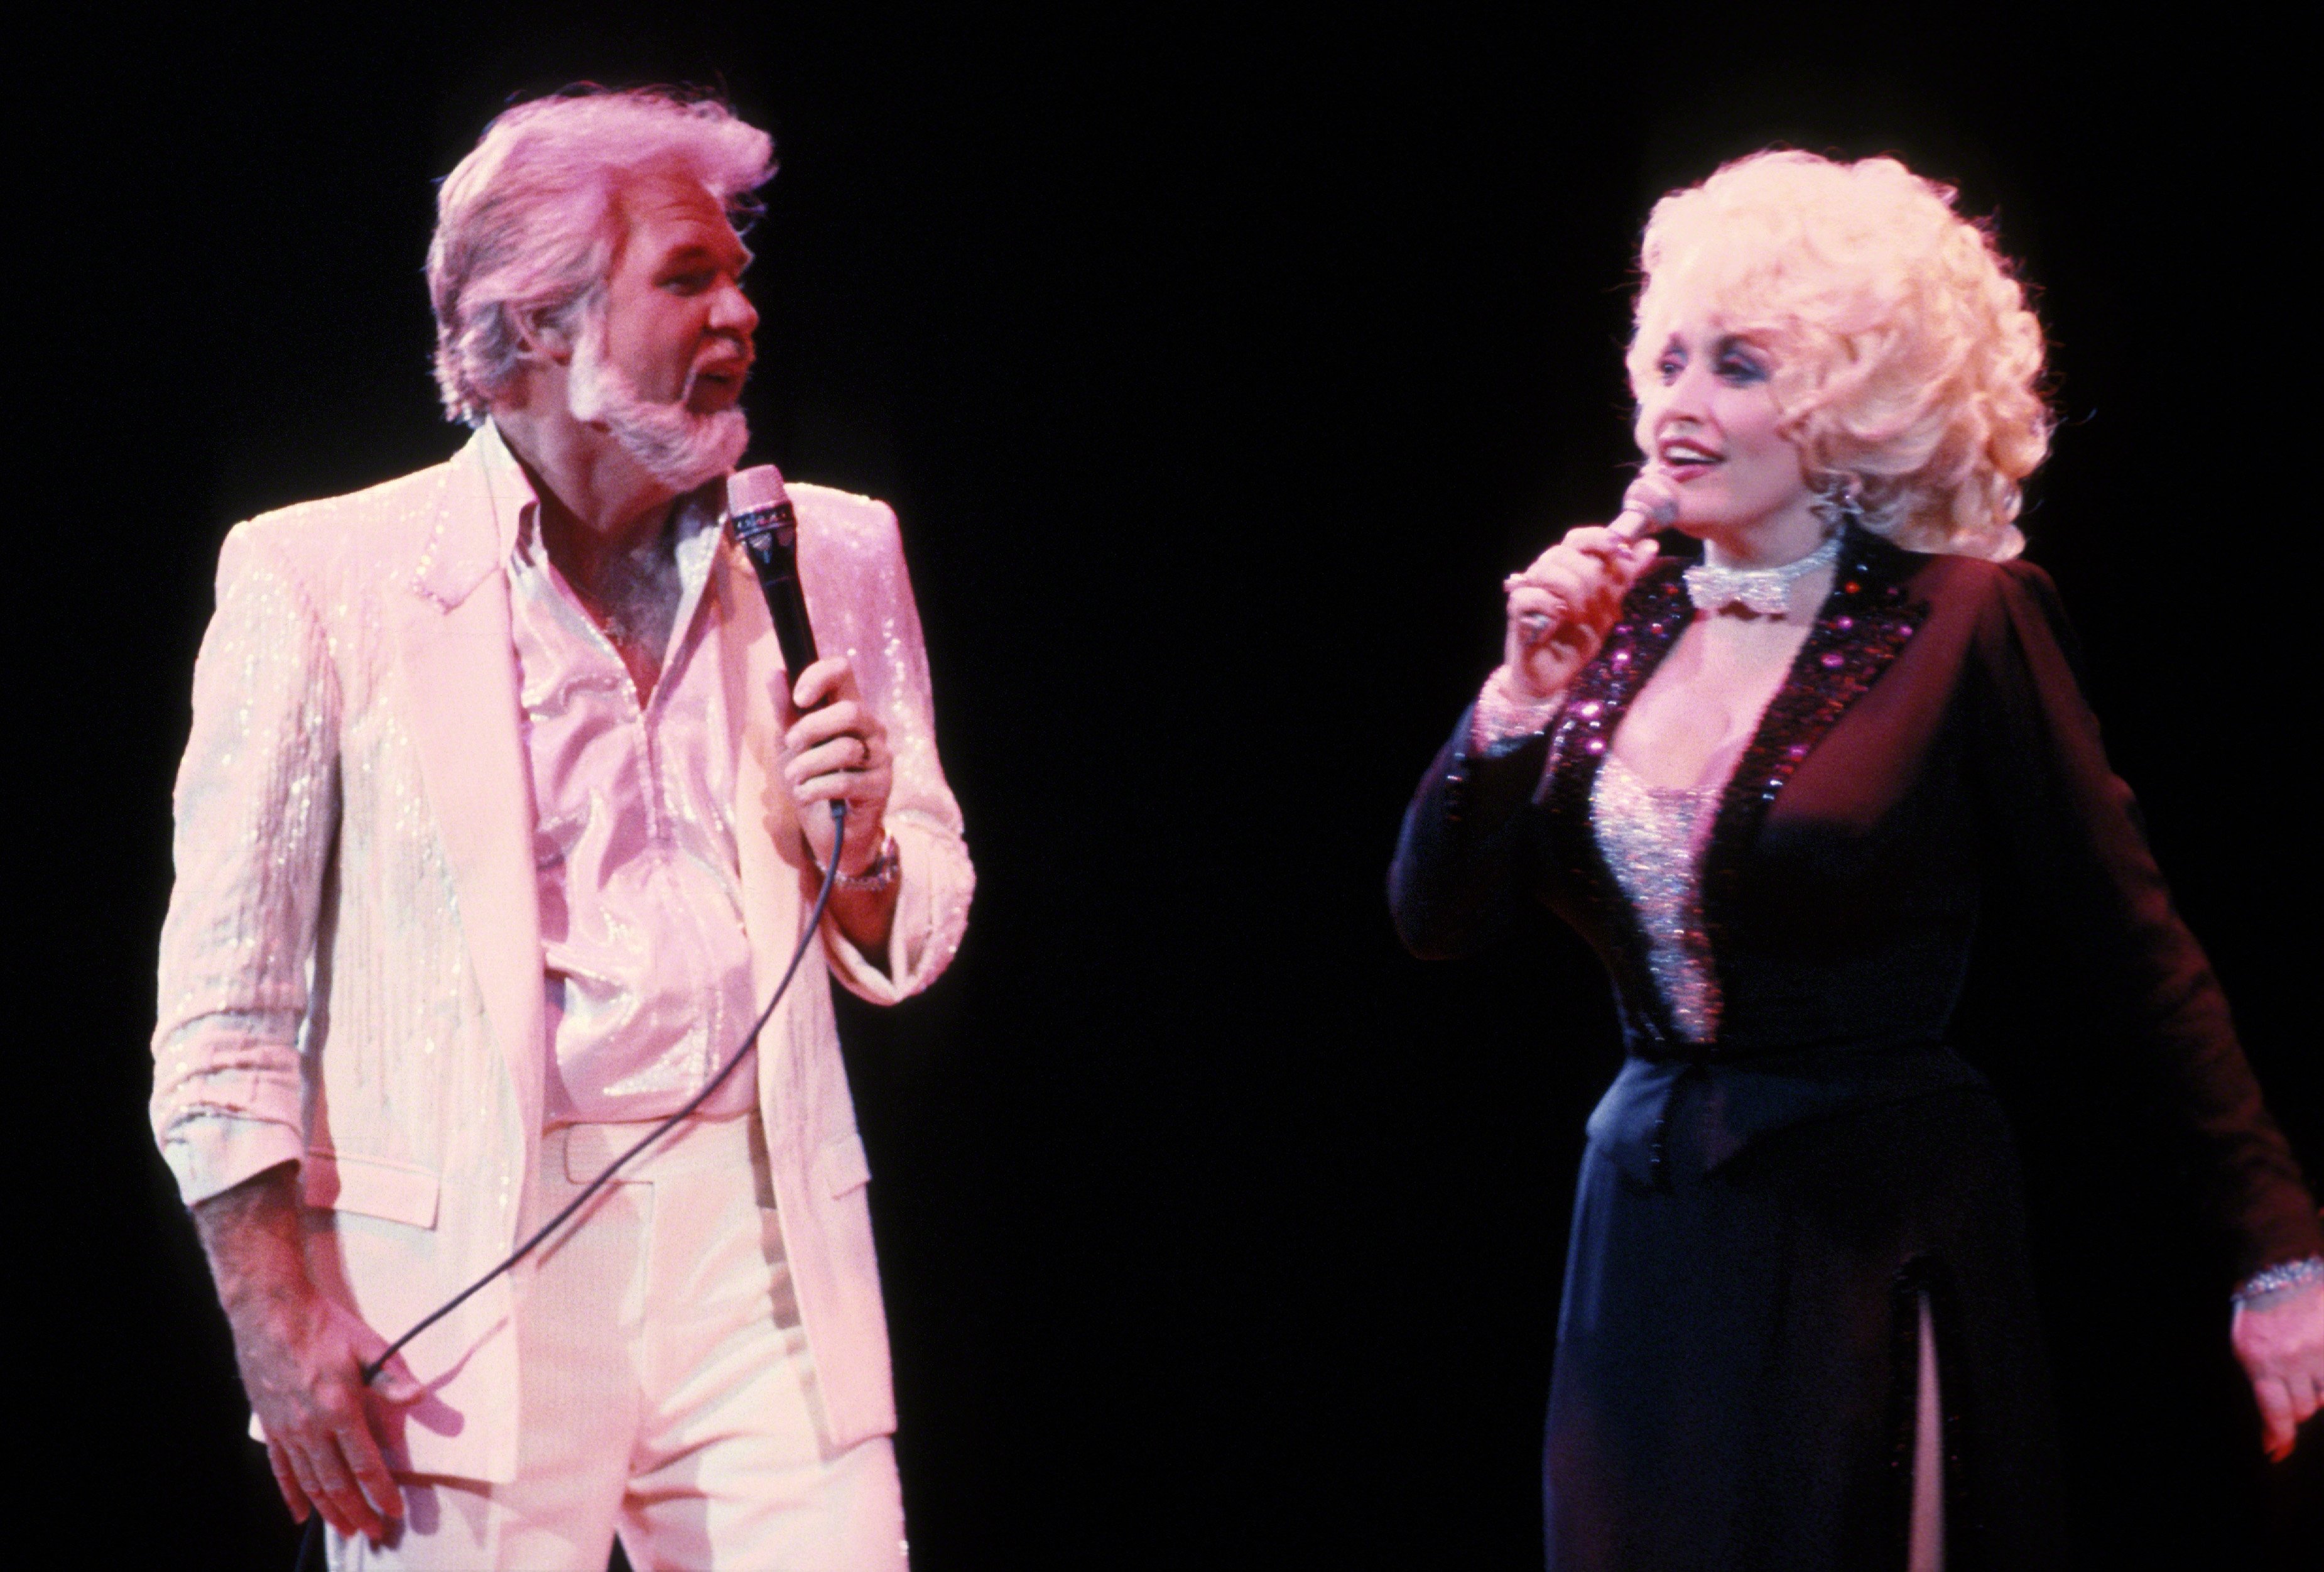 Nghe: Lost Kenny Rogers, Dolly Parton Song Resurfaced